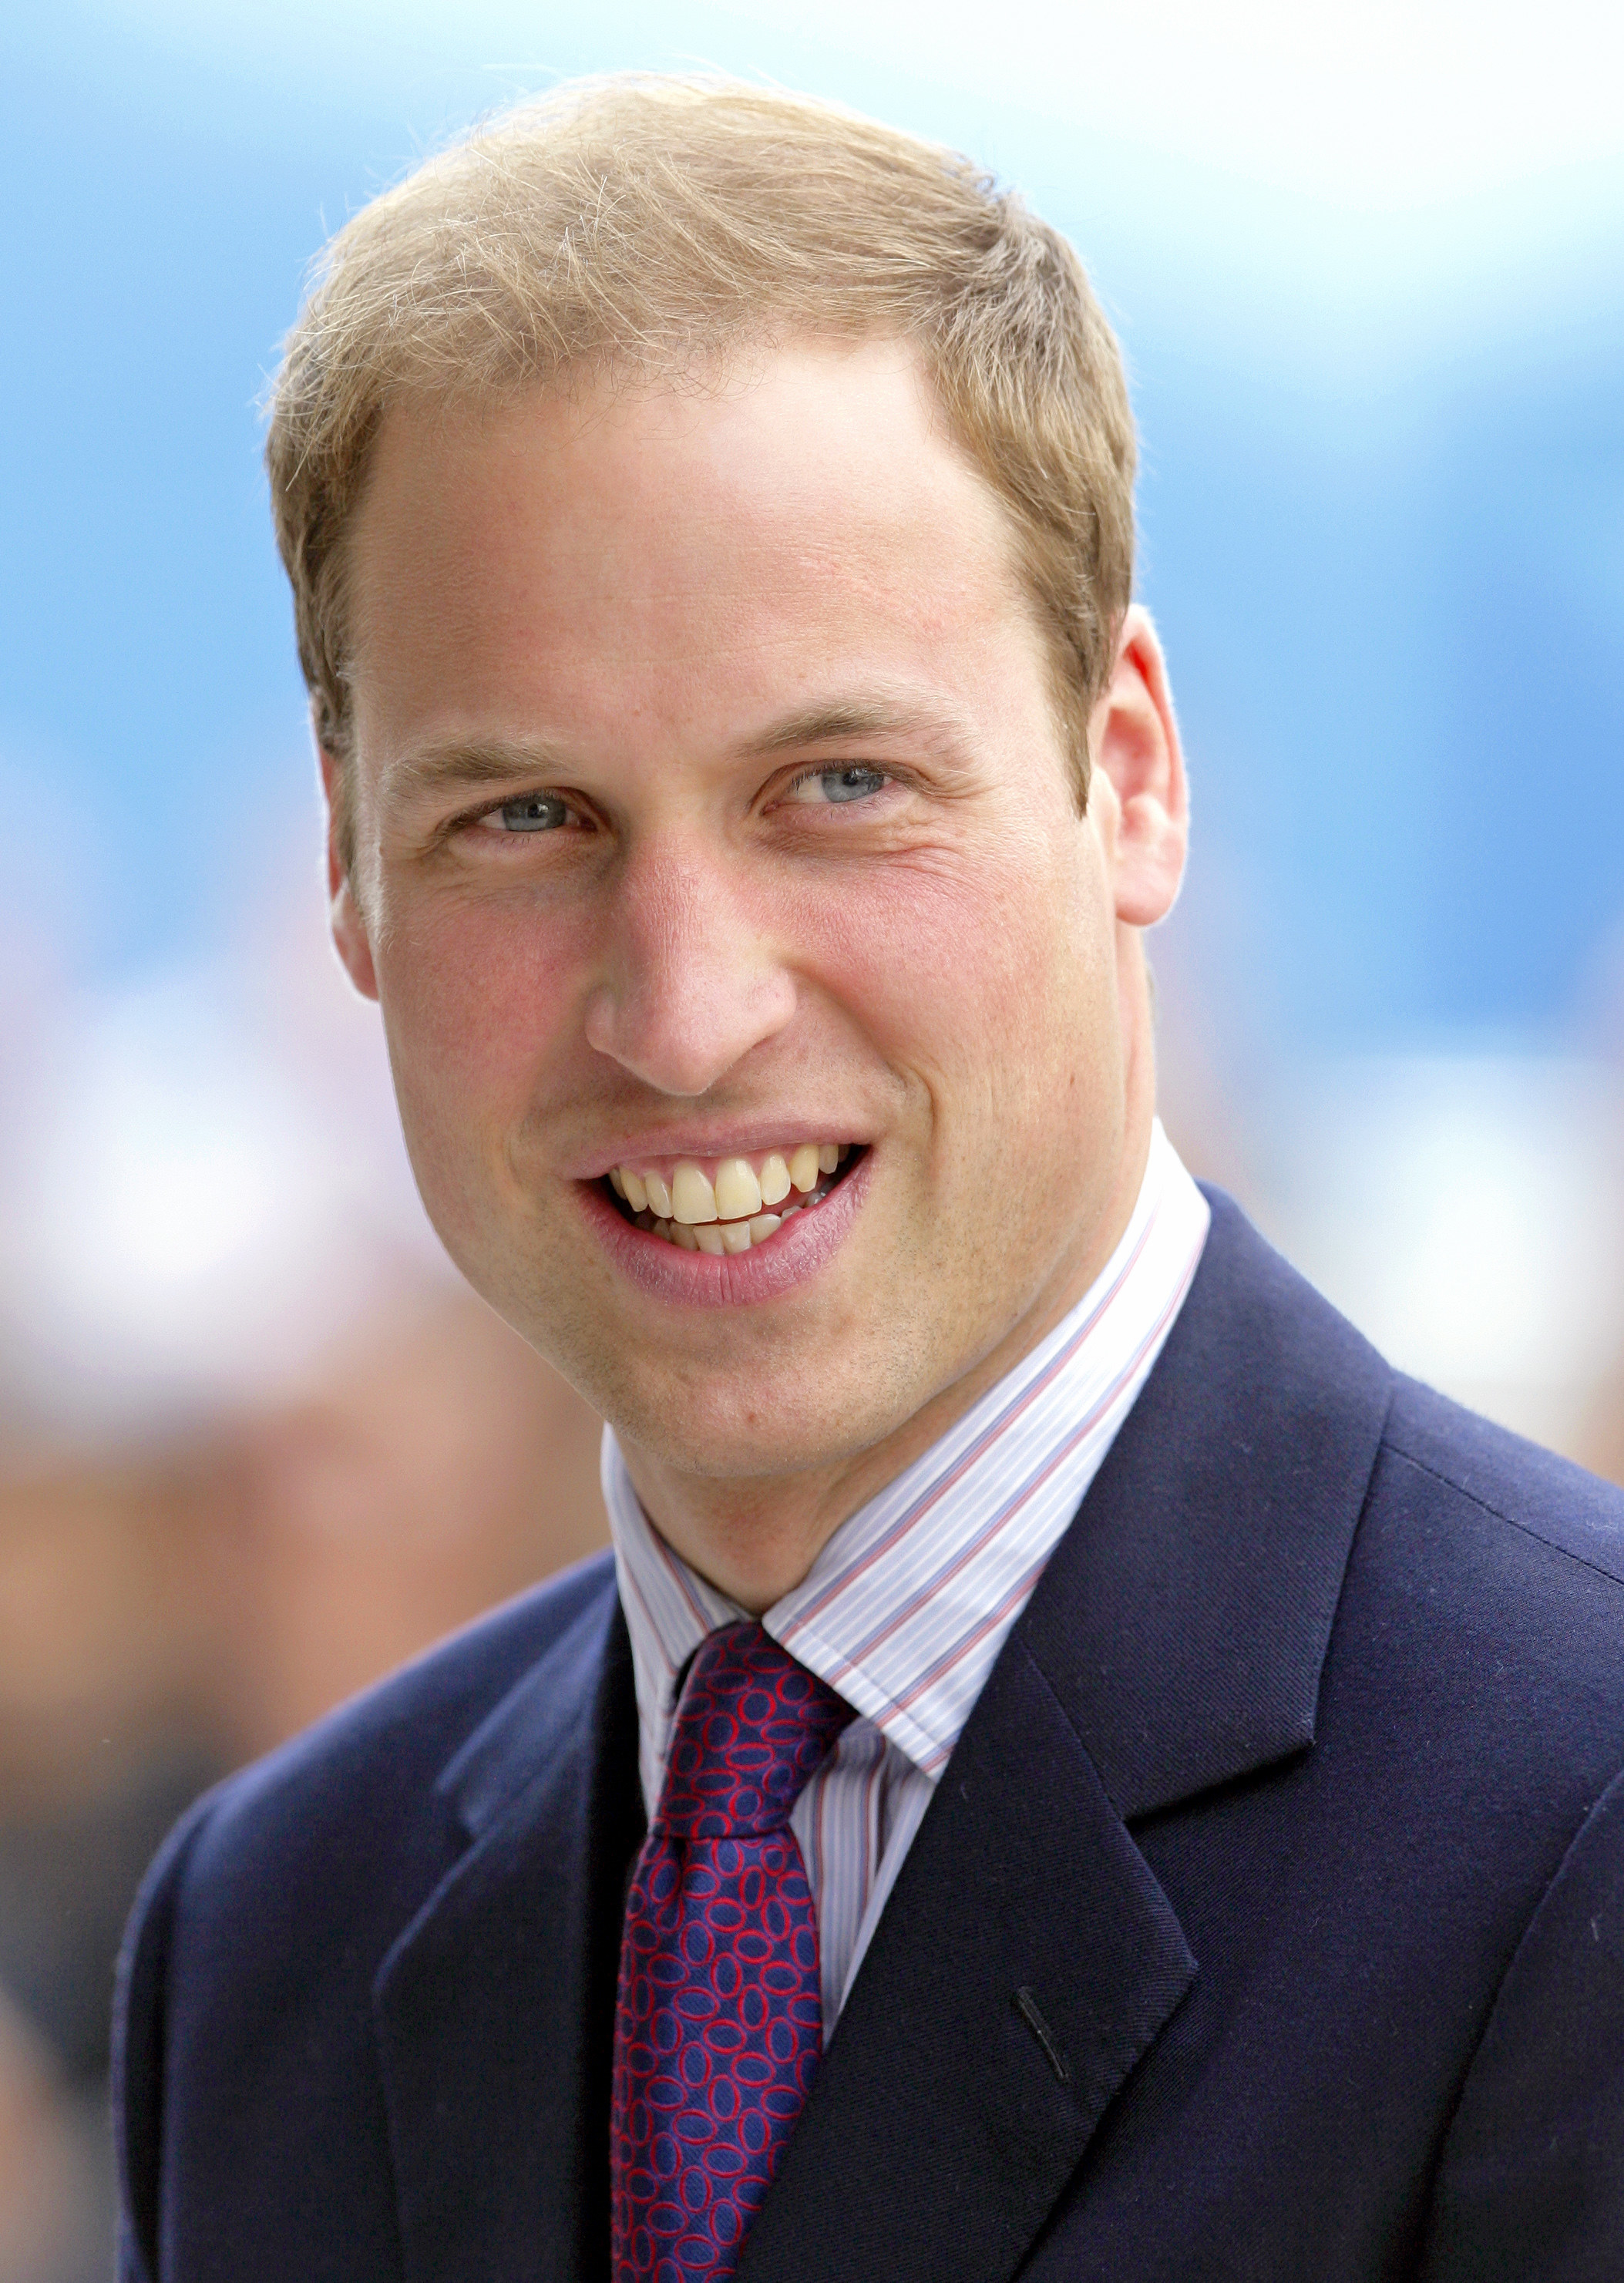 Prince William at the Royal Society&#x27;s 350th Anniversary Convocation in 2010